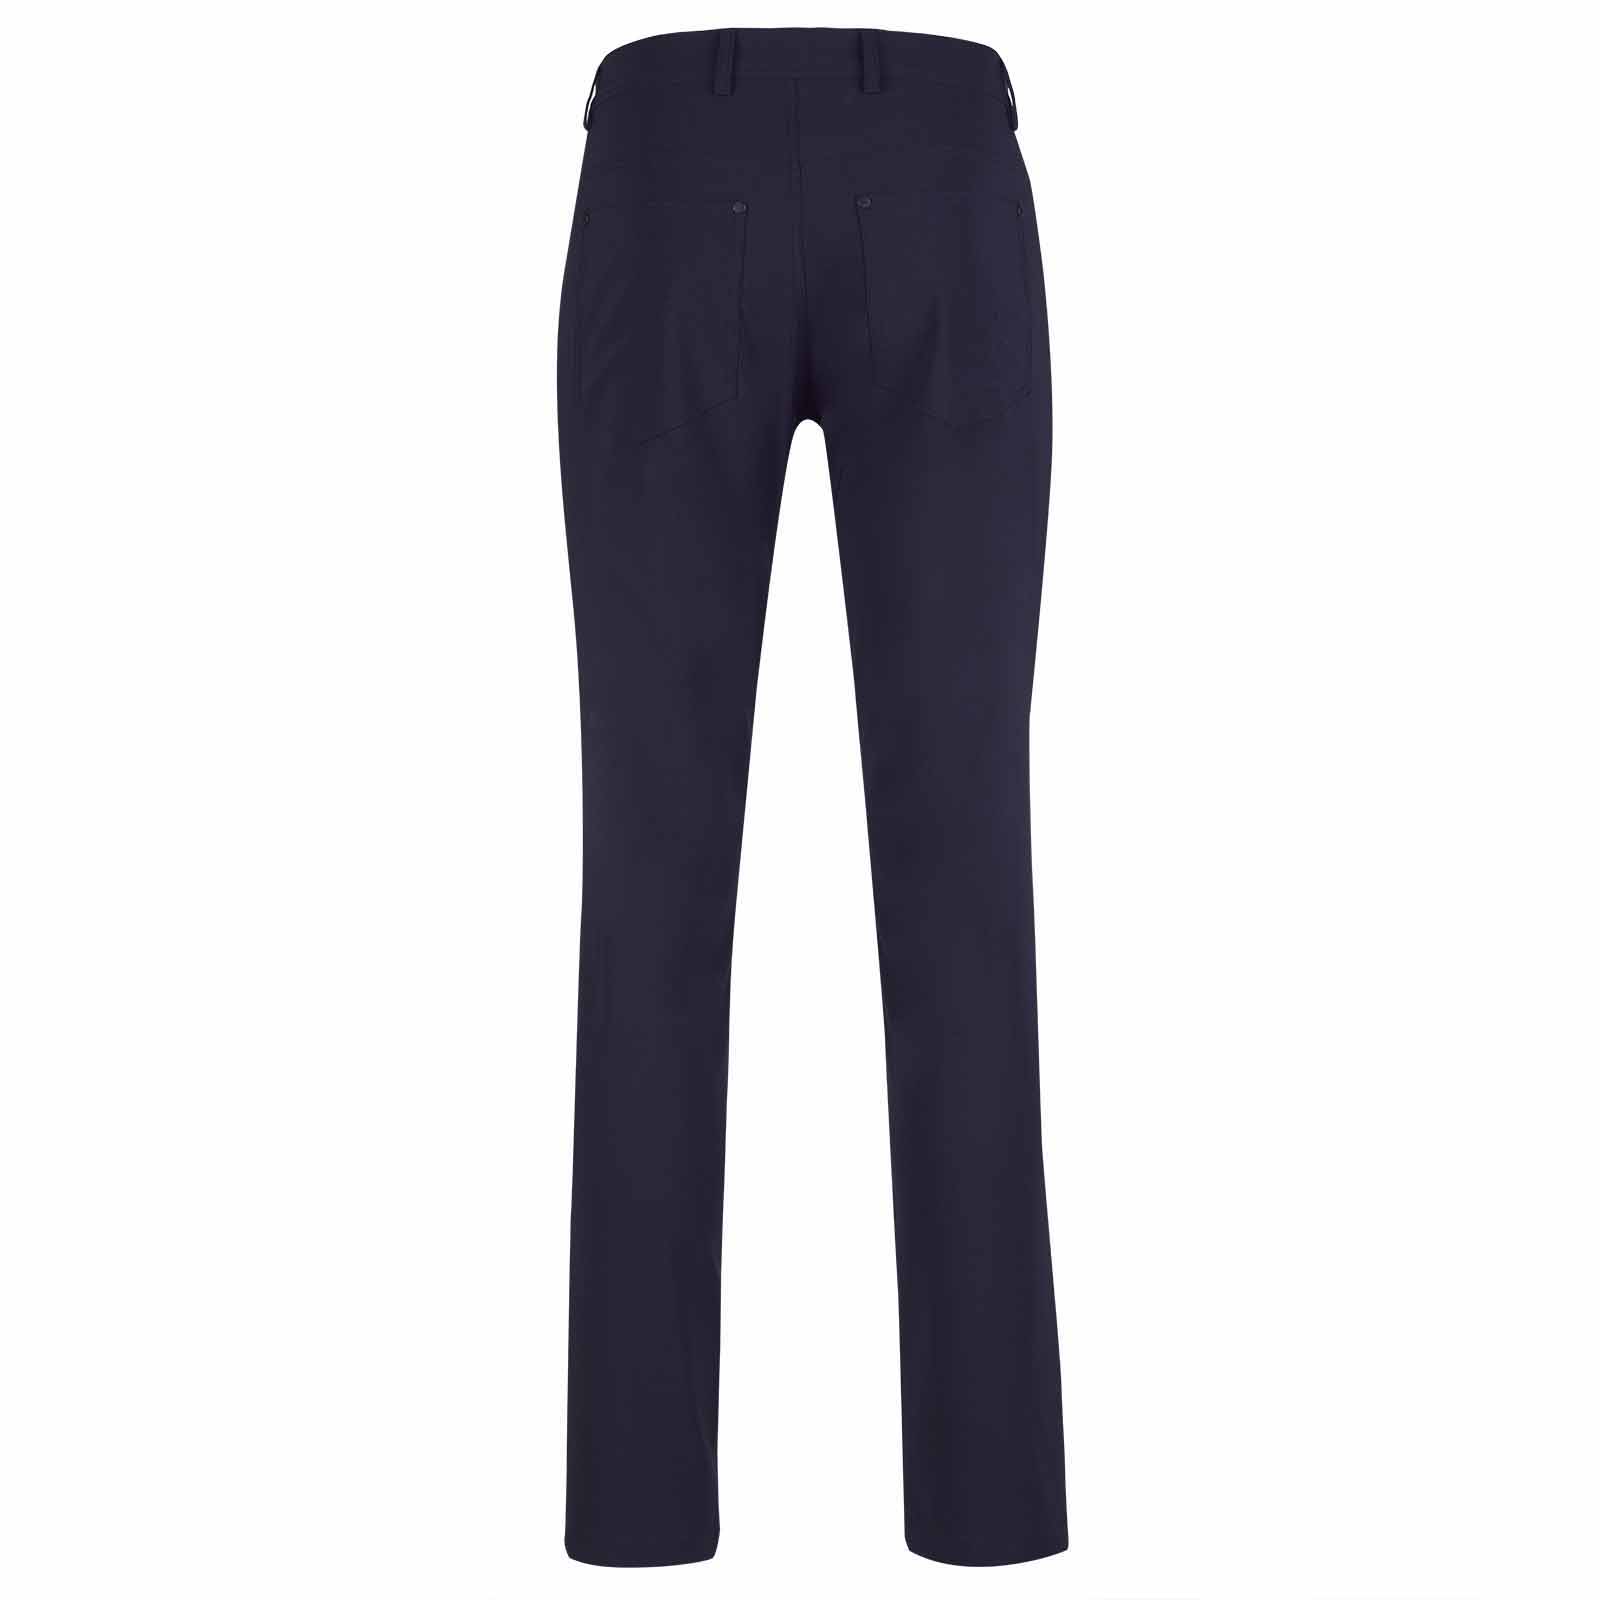 Men's golf pants, water-repellent, with stretch comfort in extra slim fit